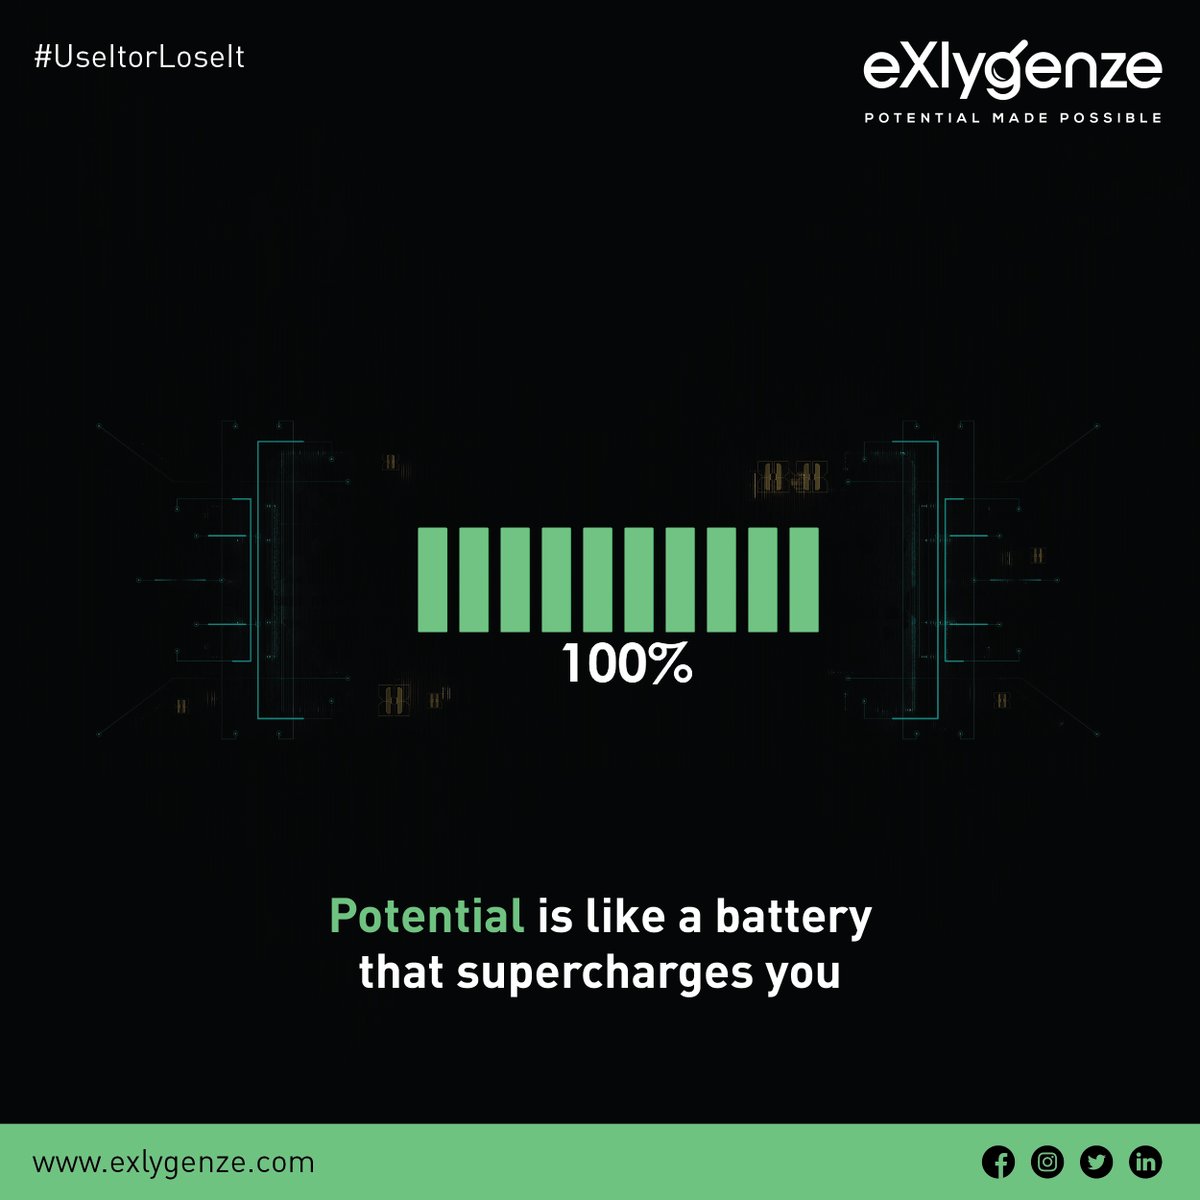 Power up your capabilities, skills & talents by connecting with your innate #potential. The choice is yours to get a boost using it or stay behind keeping these super batteries unused.
#UseItLoseIt #Skills #Talent #Upskilling 
#eXlygenze #PotentialMadePossible #Leadership #Growth